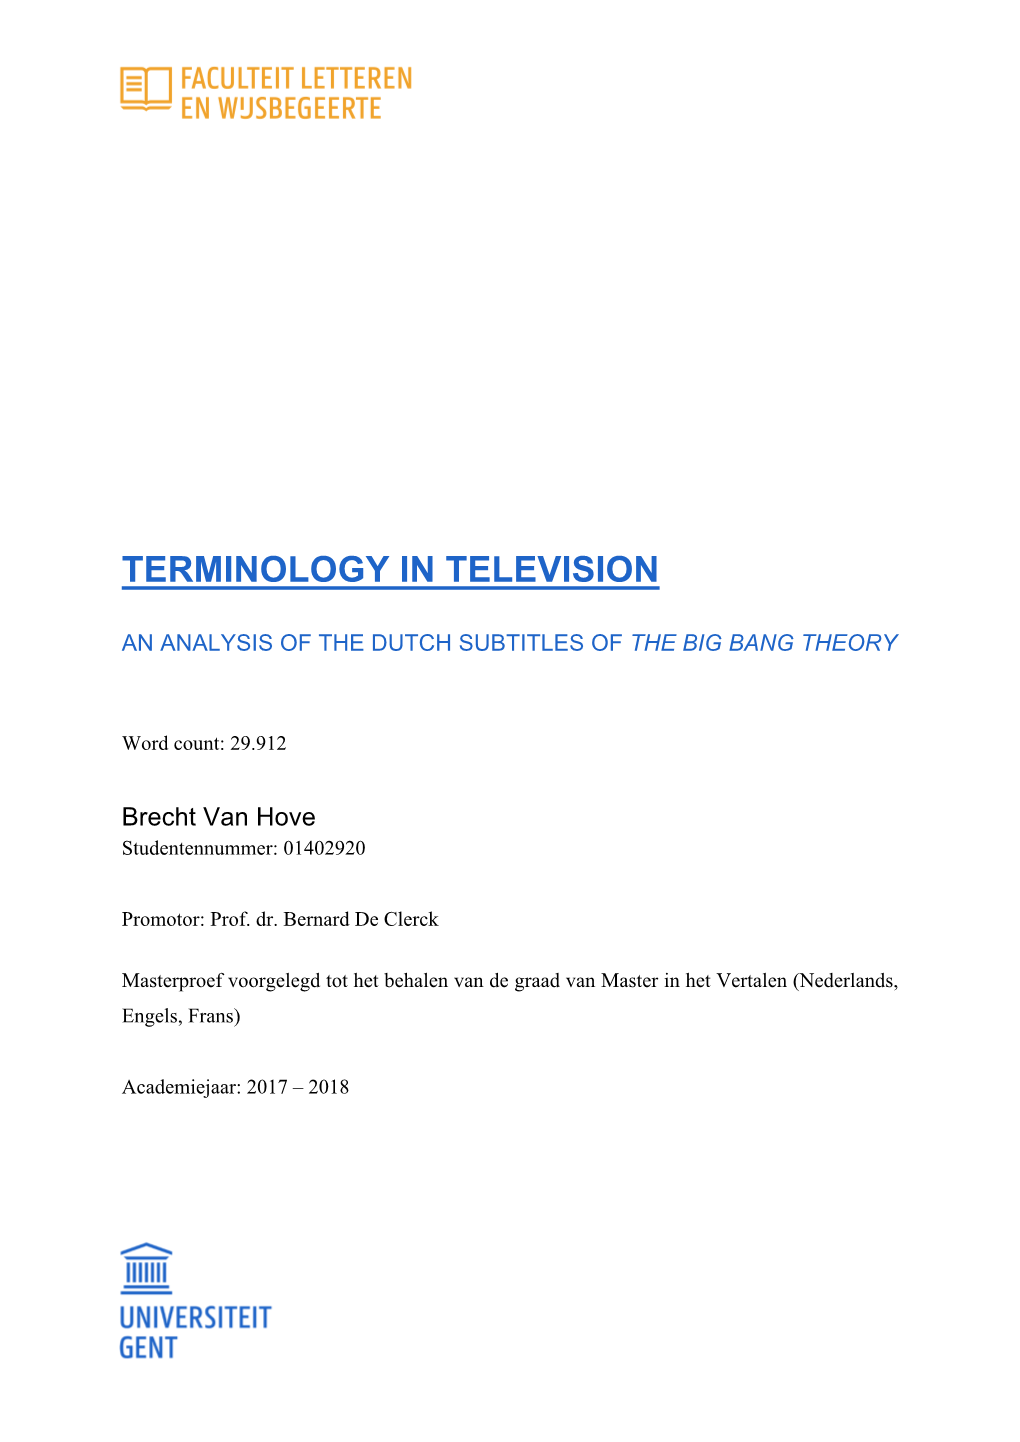 Terminology in Television